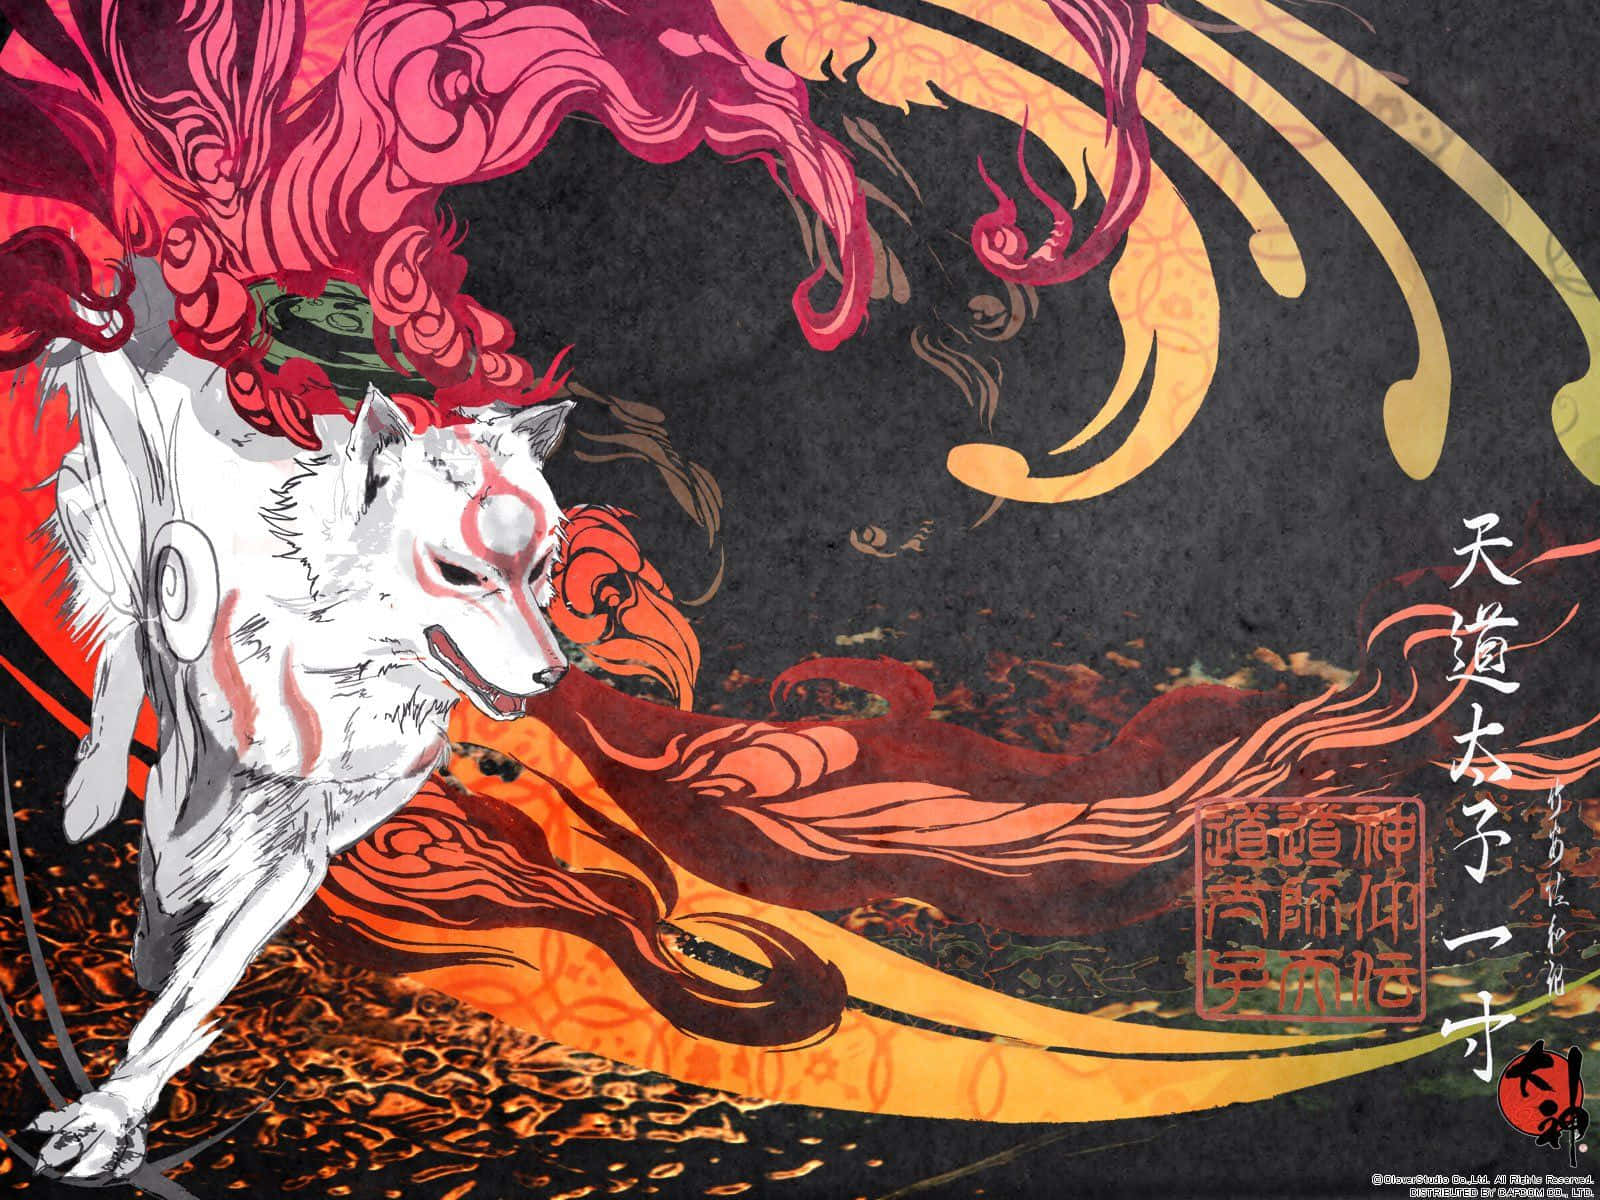 Experience a magical masterpiece with Okami HD Wallpaper